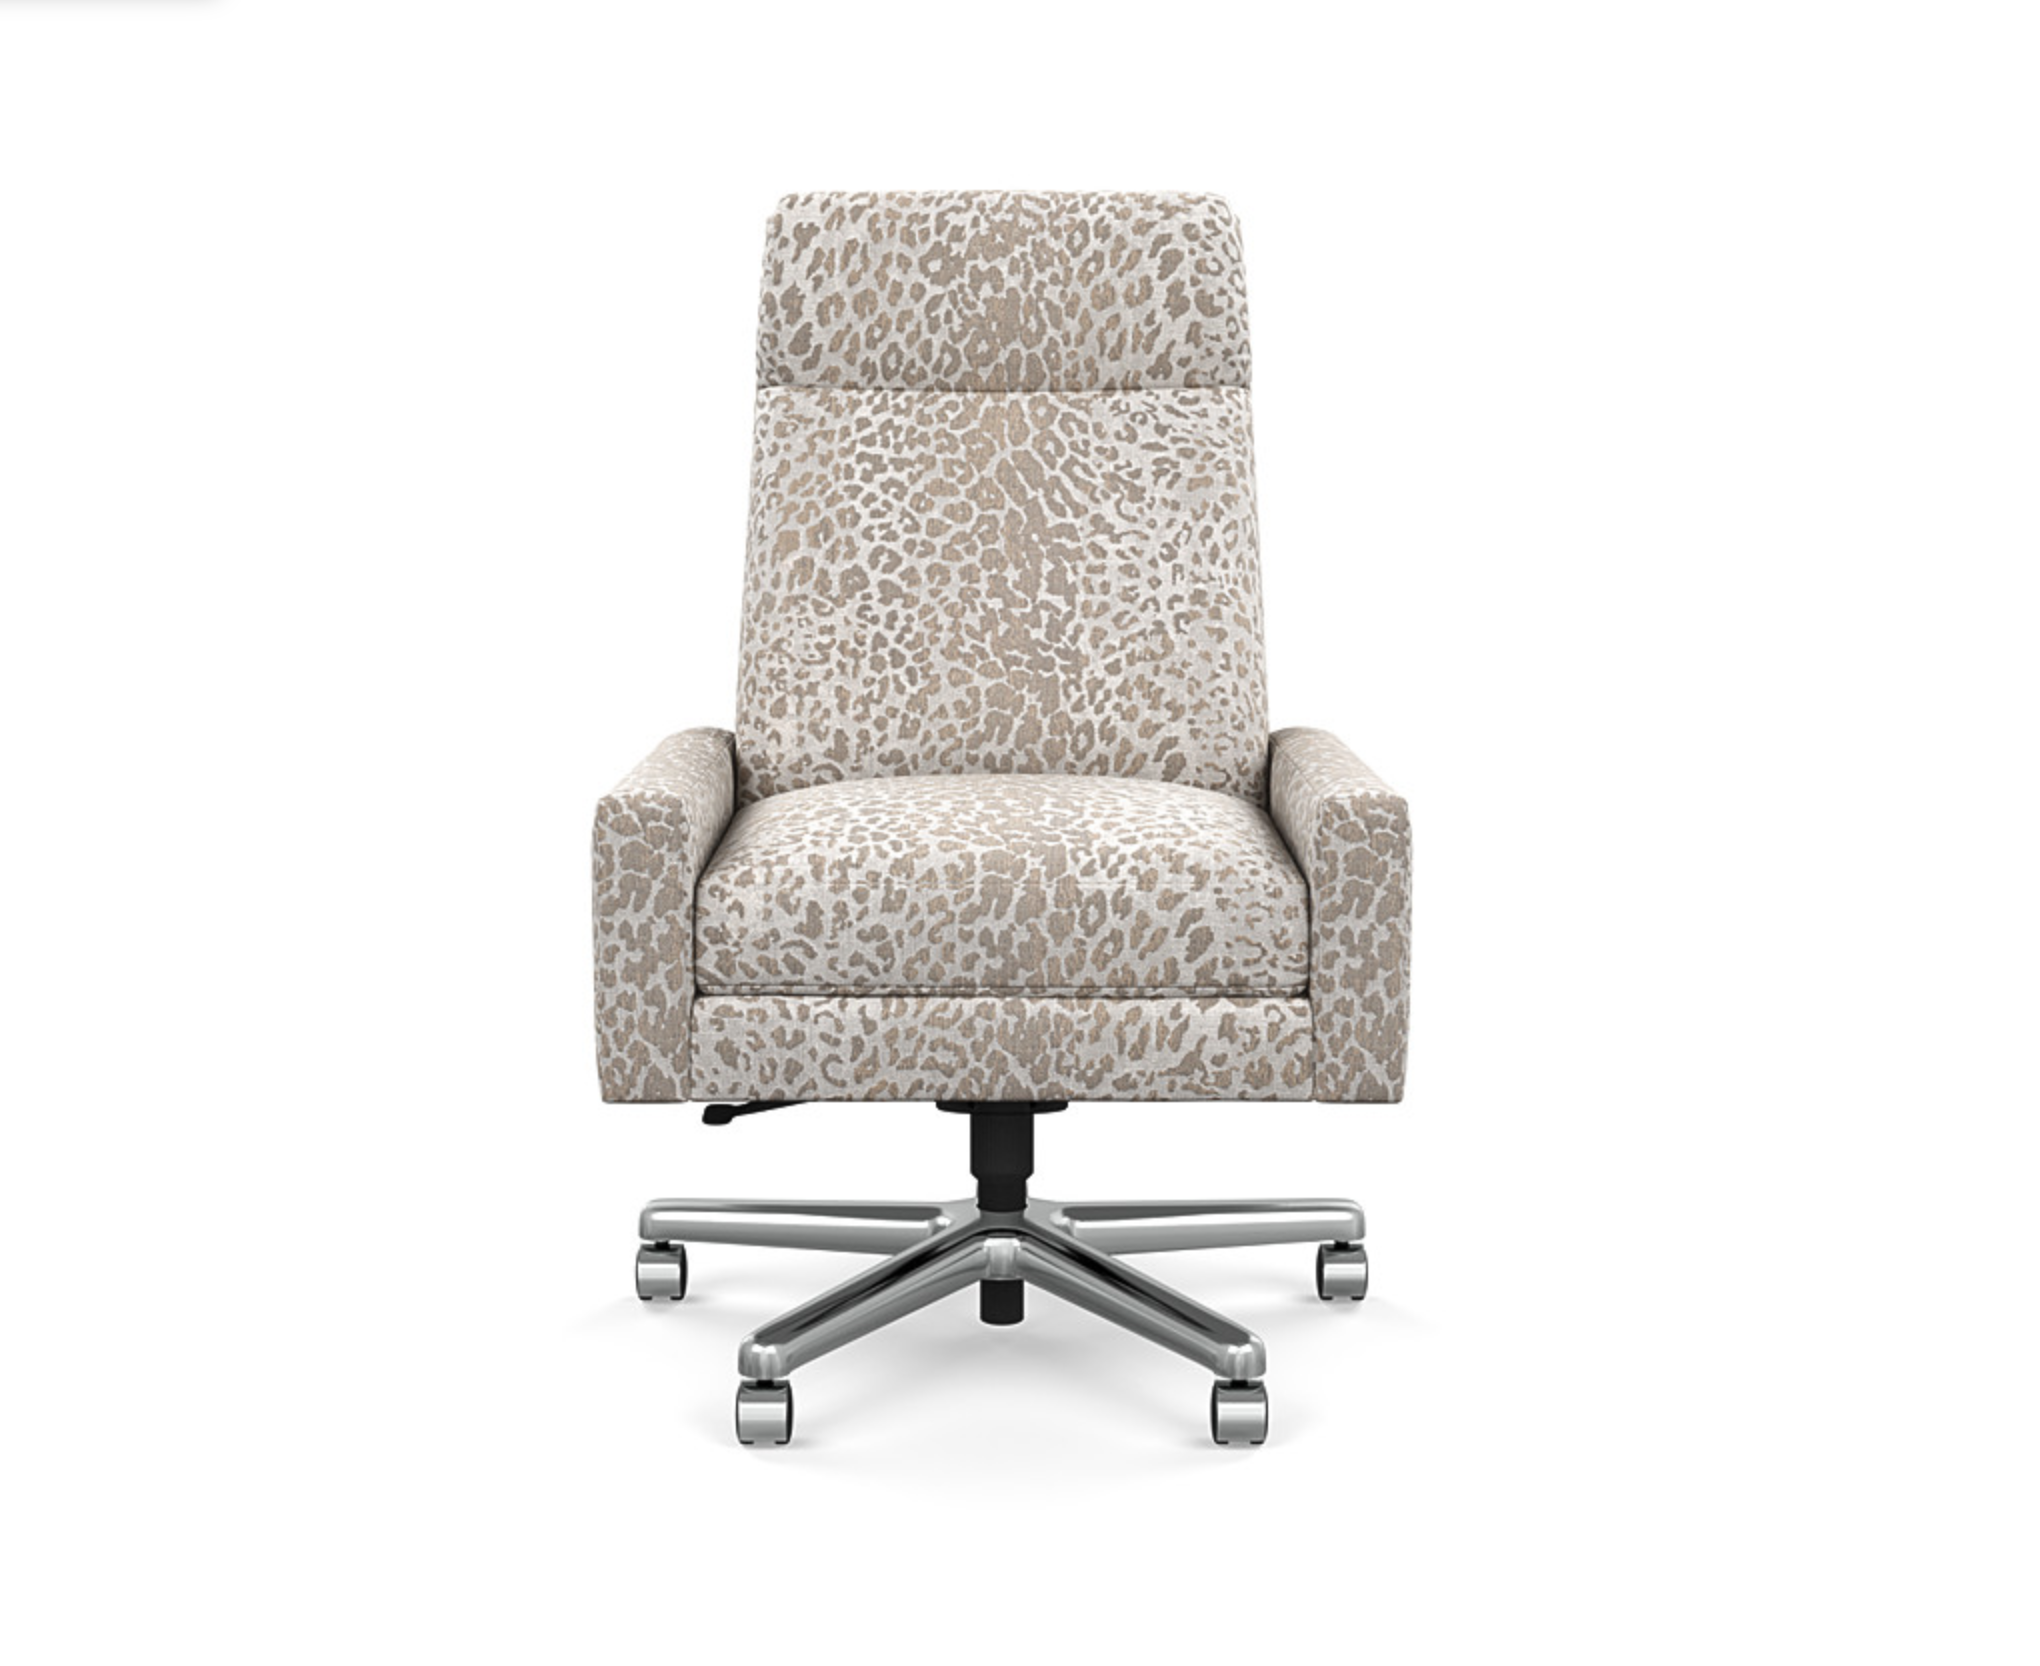 The Best Office Chairs Of 2021 Stylish Top Reviewed Desk Chairs